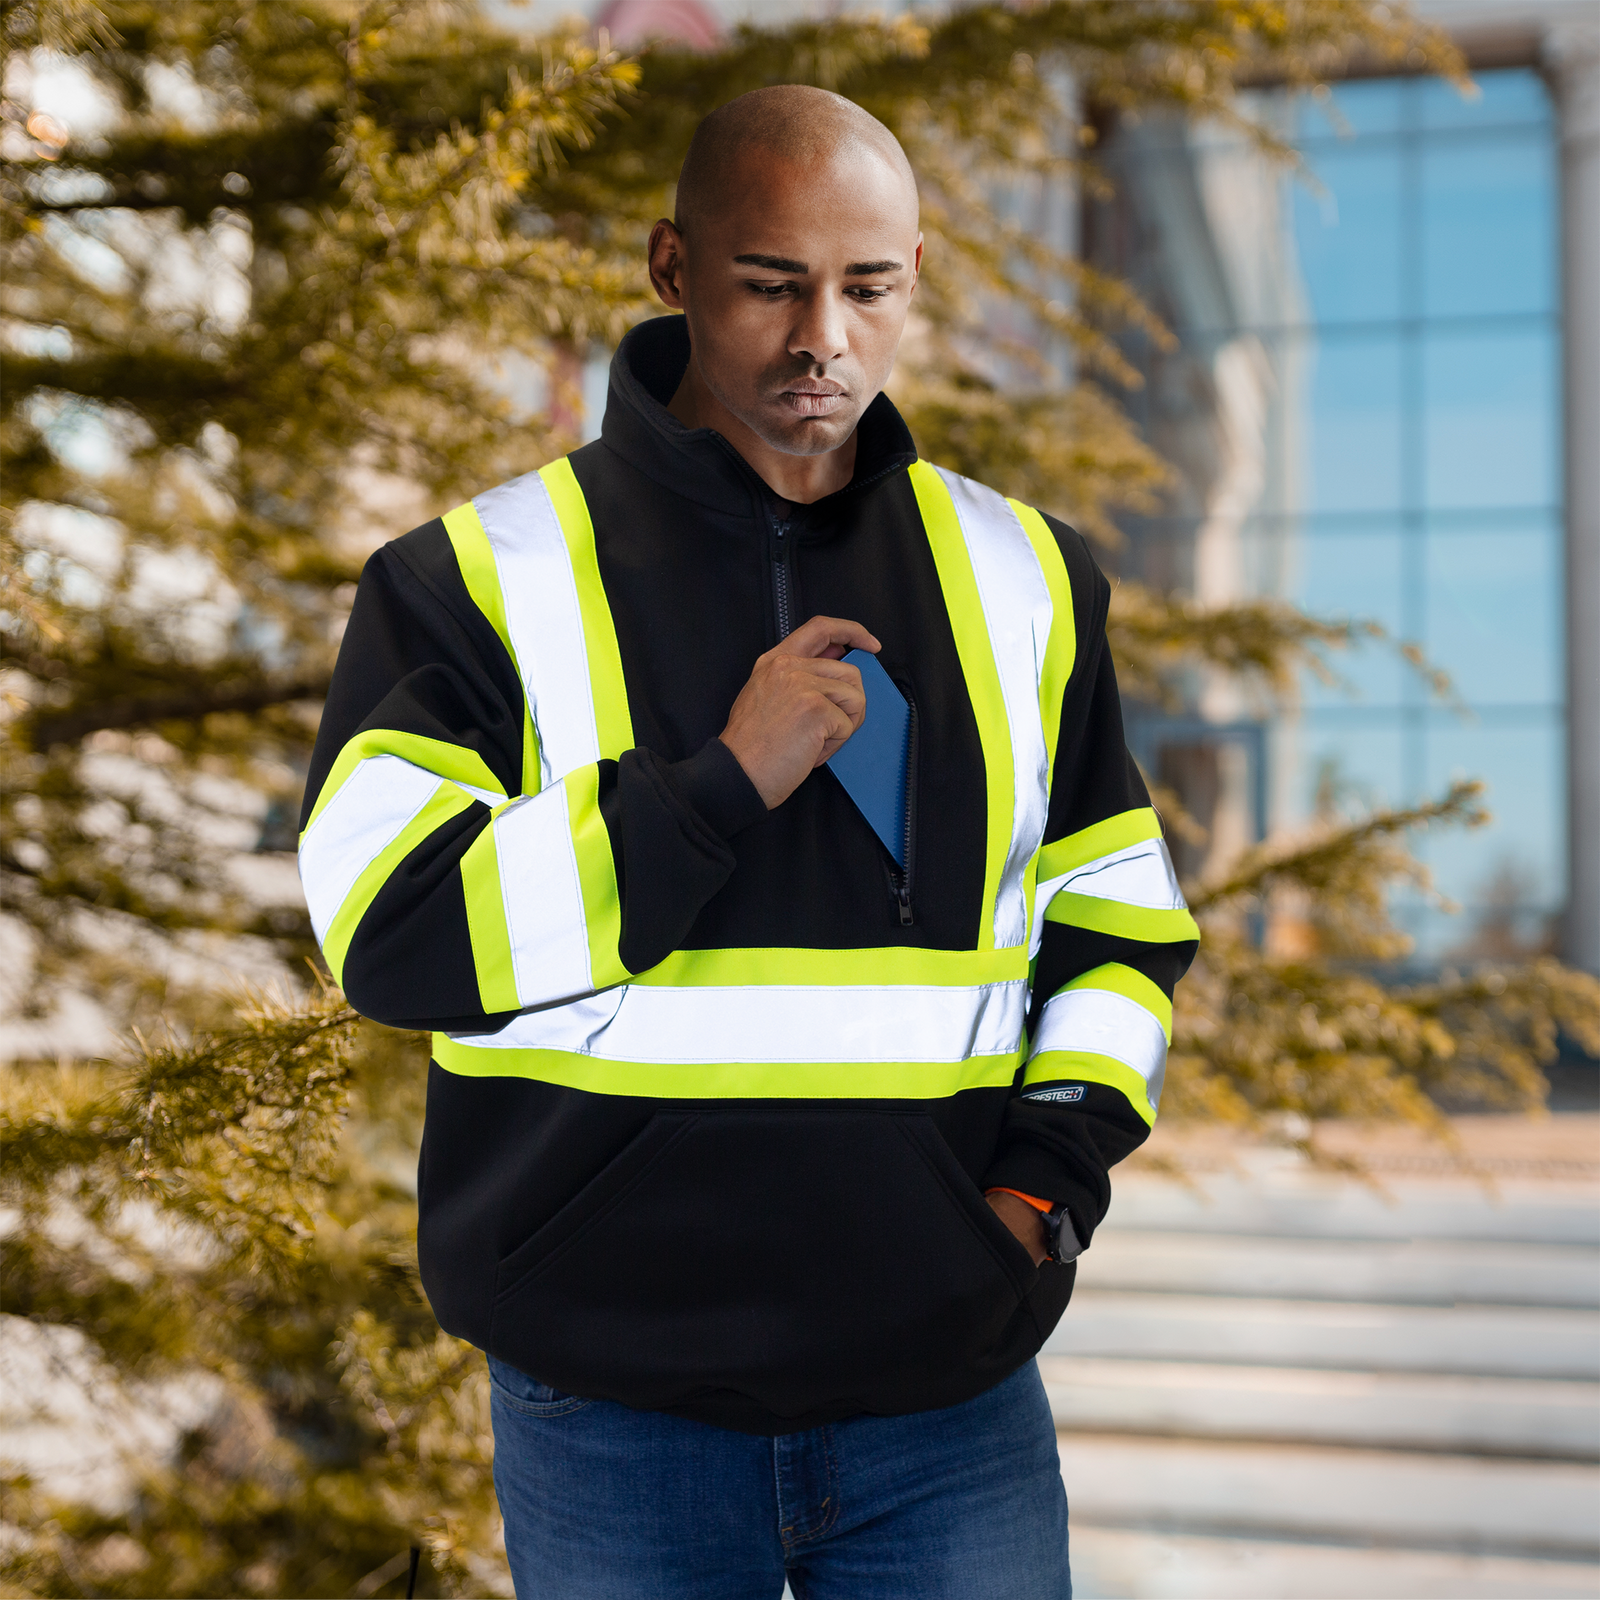 man storing his phone inside the chest pocket of the black safety sweater with reflective strips and contrasting yellow background